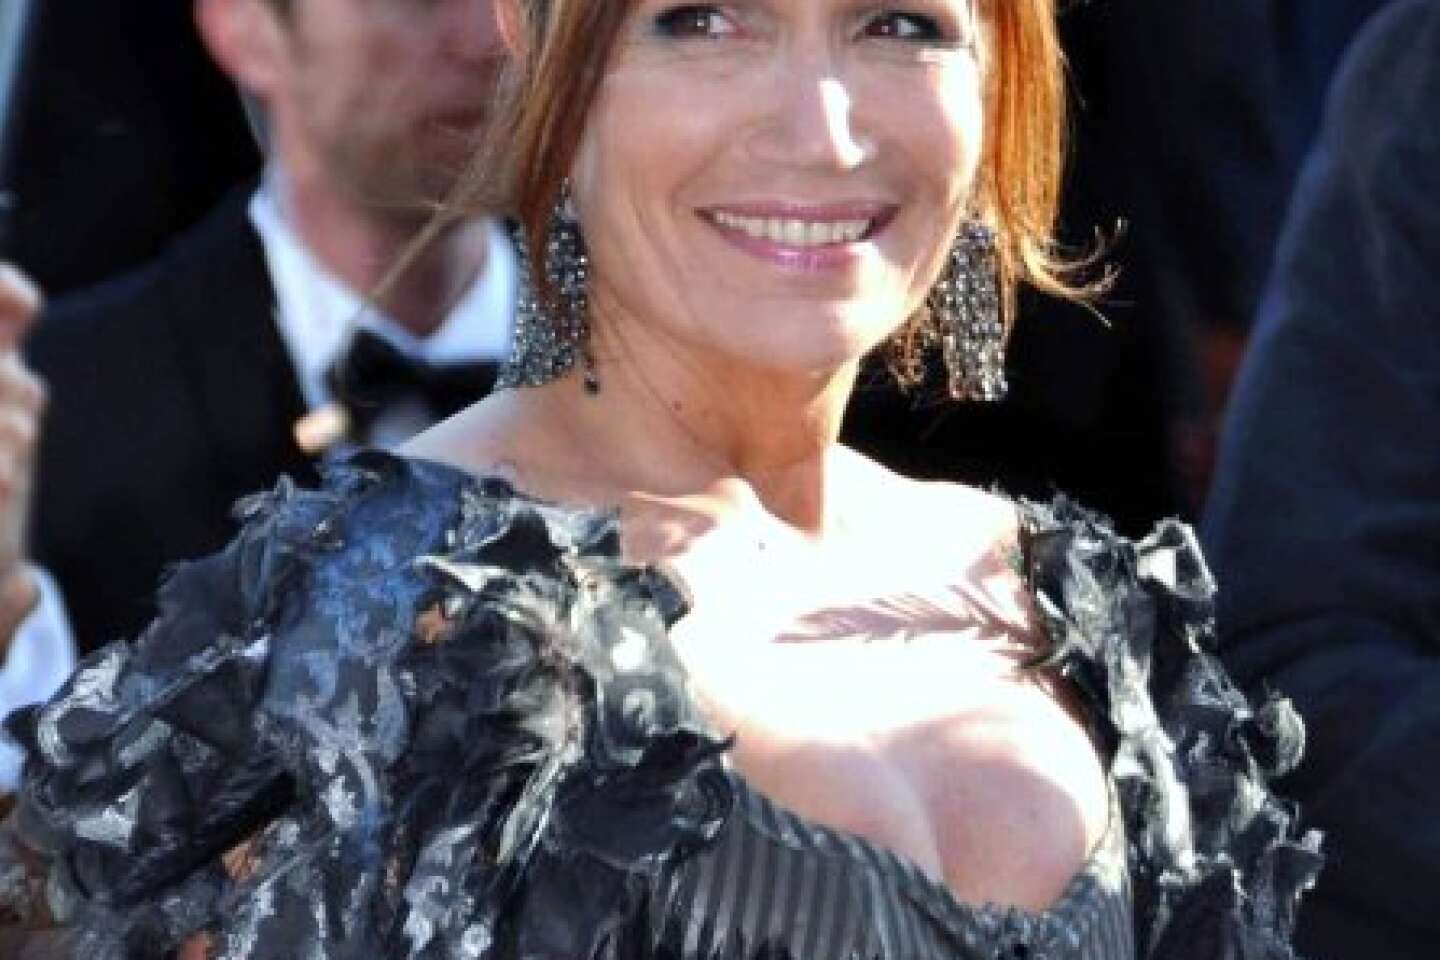 The actress Clémentine Célarié in turn “dissociates” herself from the platform of support for Depardieu that she had signed